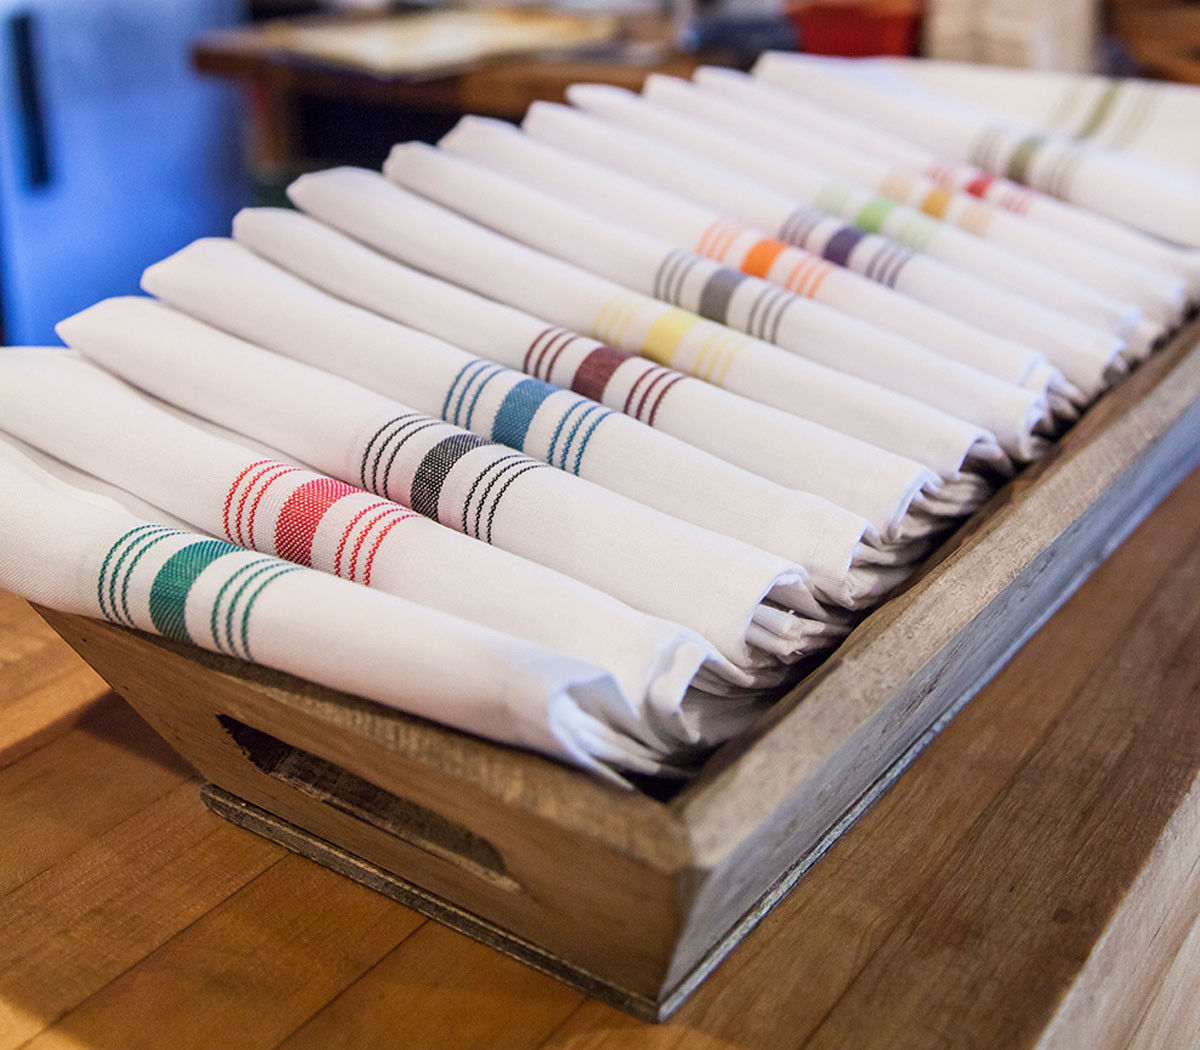 How can bistro napkins, like Milliken Signature Stripe, enhance a restaurant's ambiance?